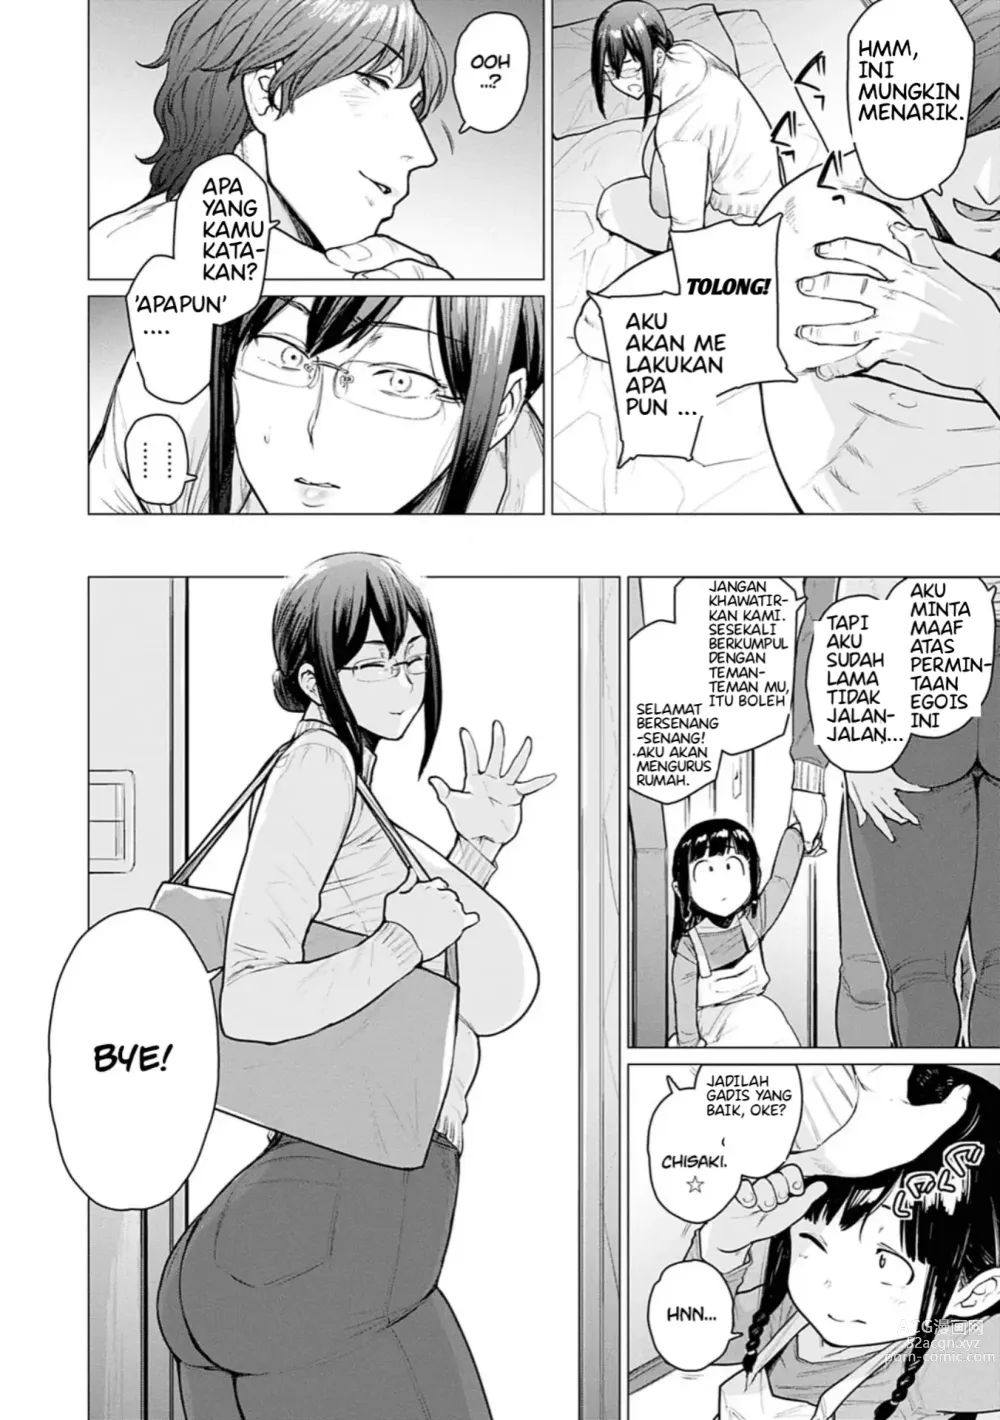 Page 11 of doujinshi The Fault That Can't Be Erased Indonesia